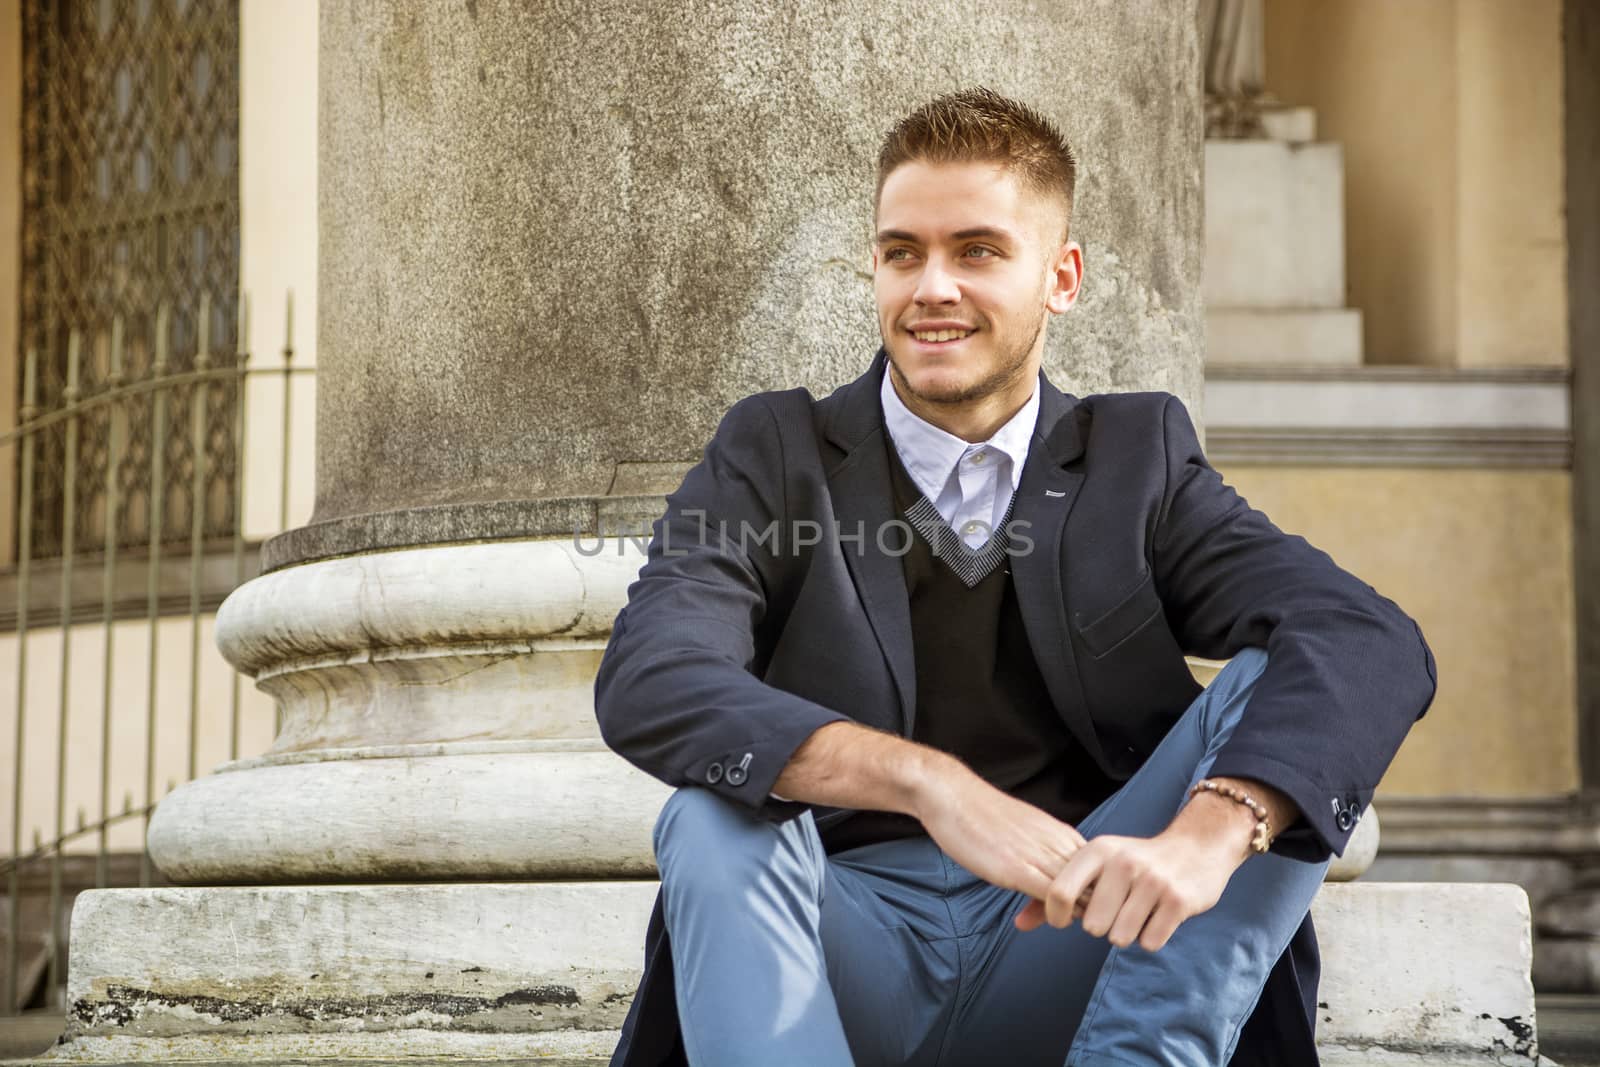 Handsome young man outdoor wearing jacket and shirt standing by historic building in European city. Turin, Italy